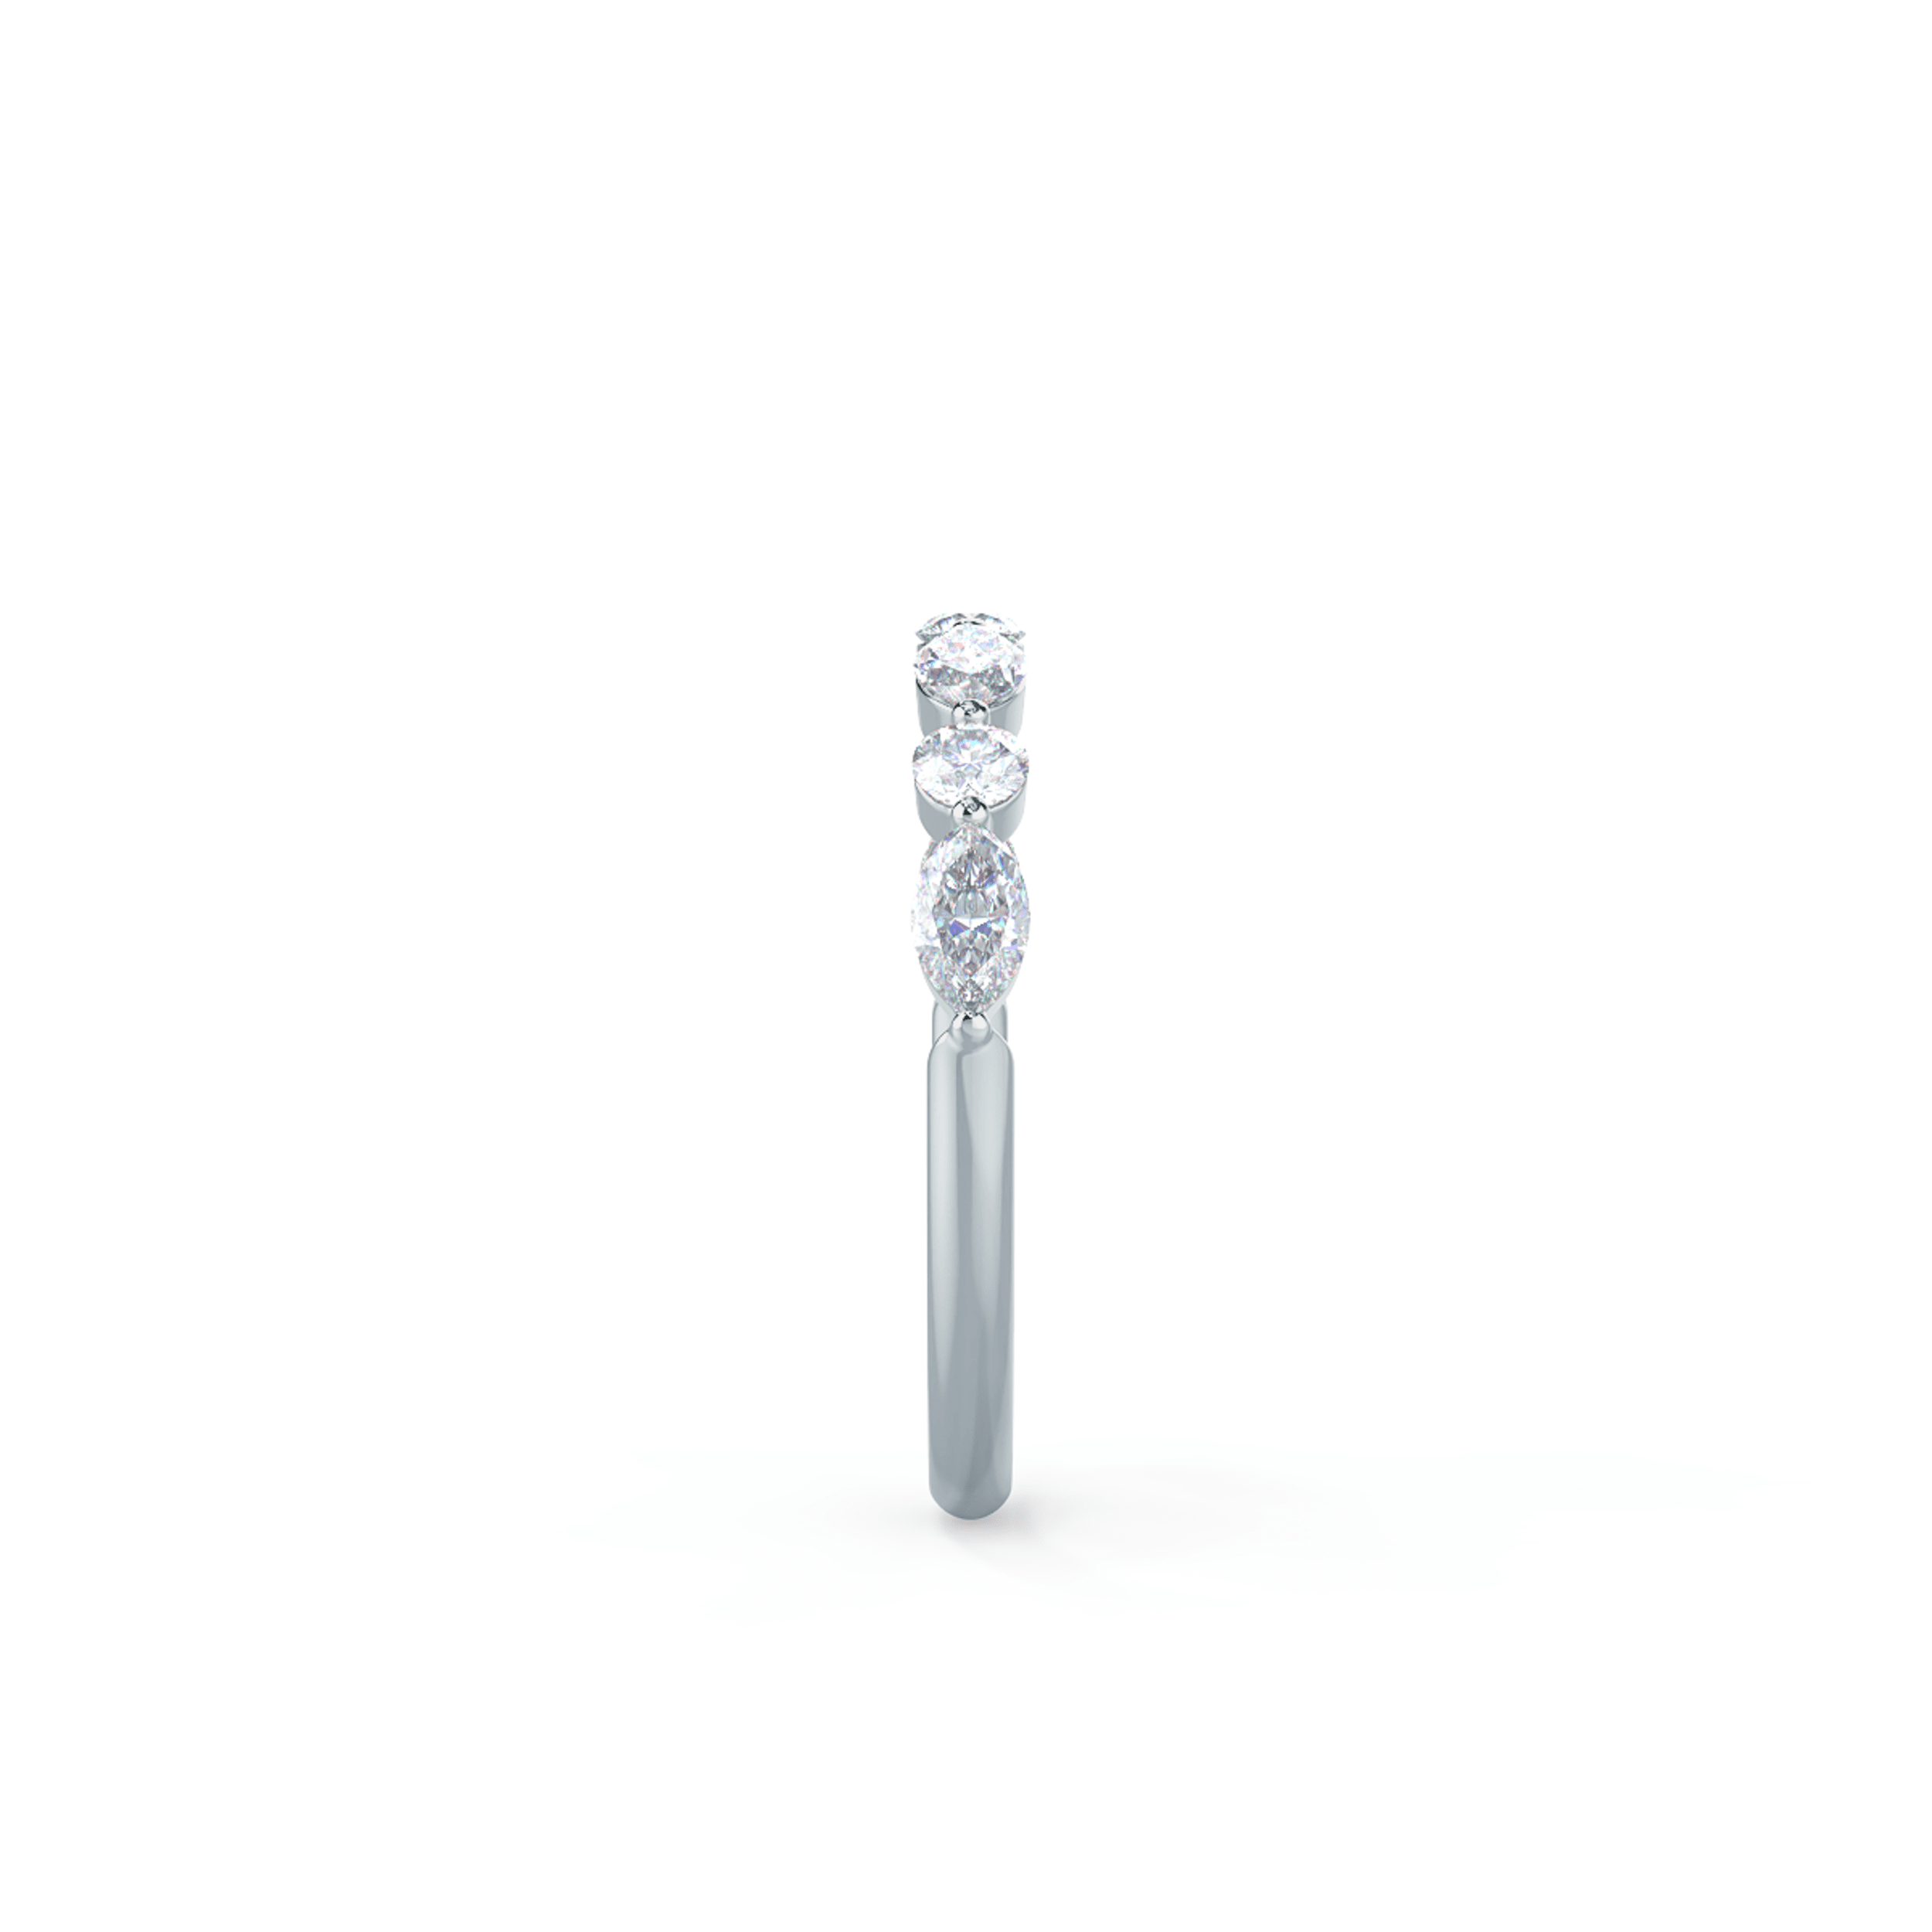 0.55 Carat Diamonds set in 18k White Gold Marquise and Round East-West Seven Stone (Side View)